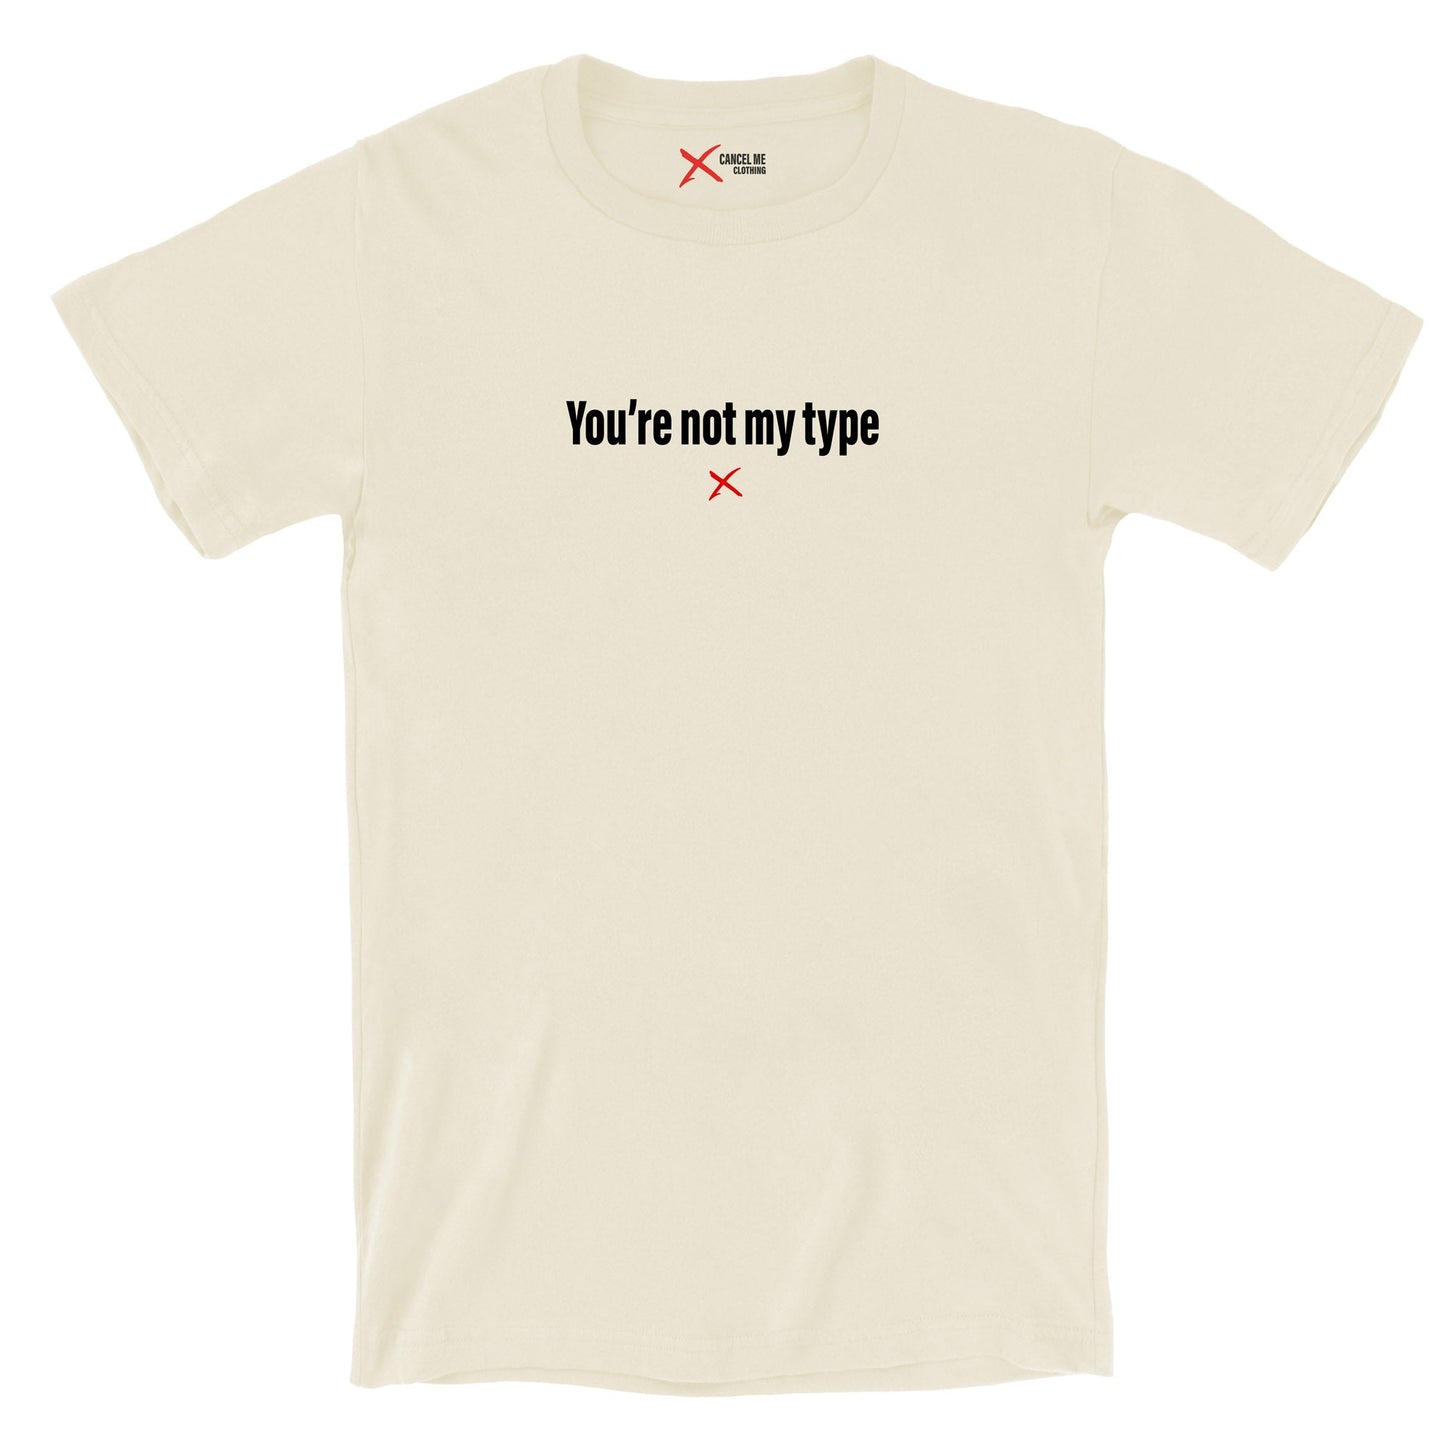 You're not my type - Shirt